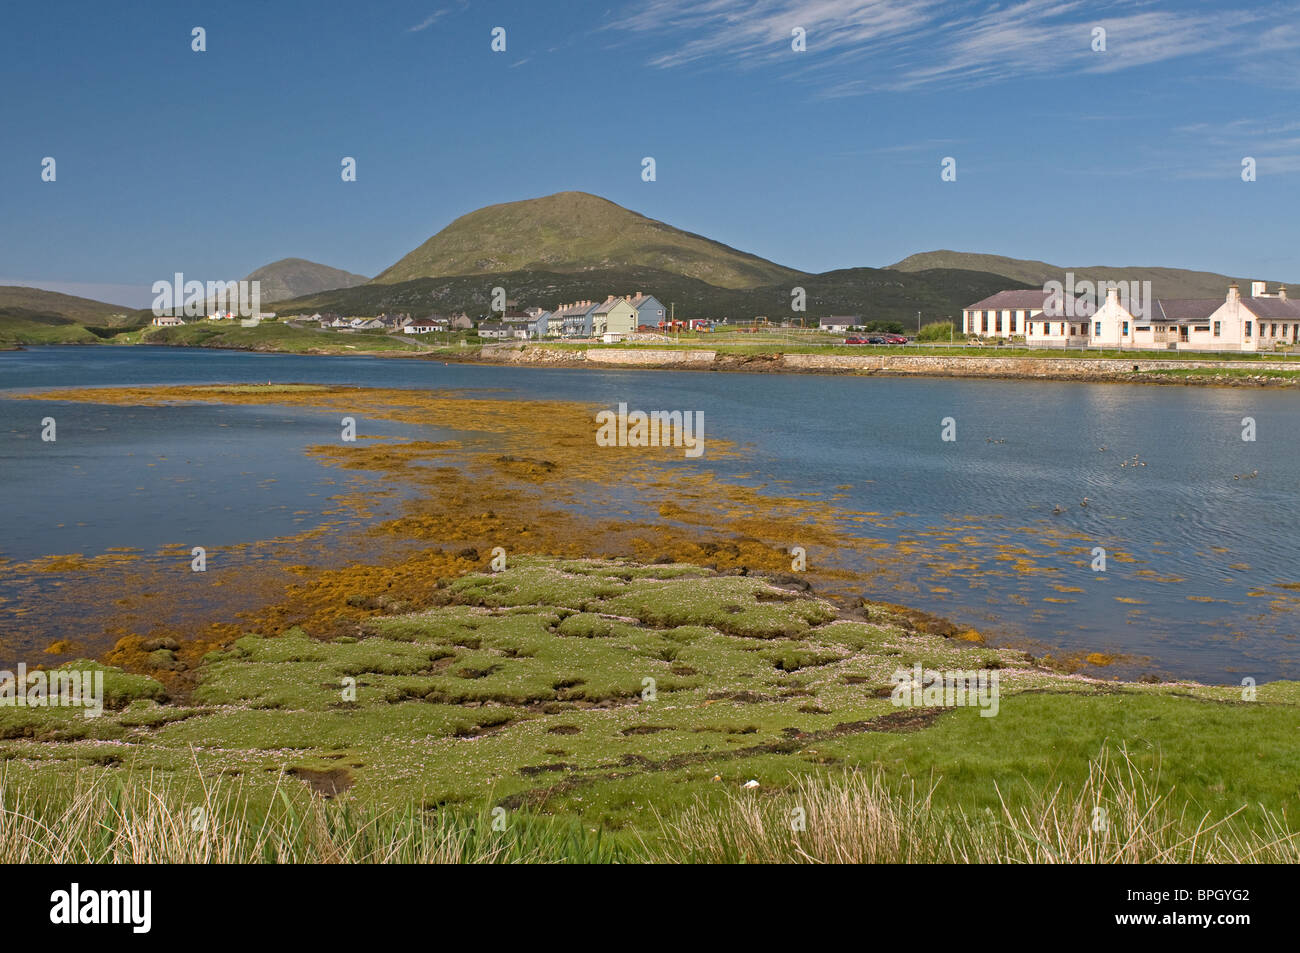 Low tide at Leverburgh, South Harris, Western Isles, Outer Hebrides. Scotland.   SCO 6486 Stock Photo